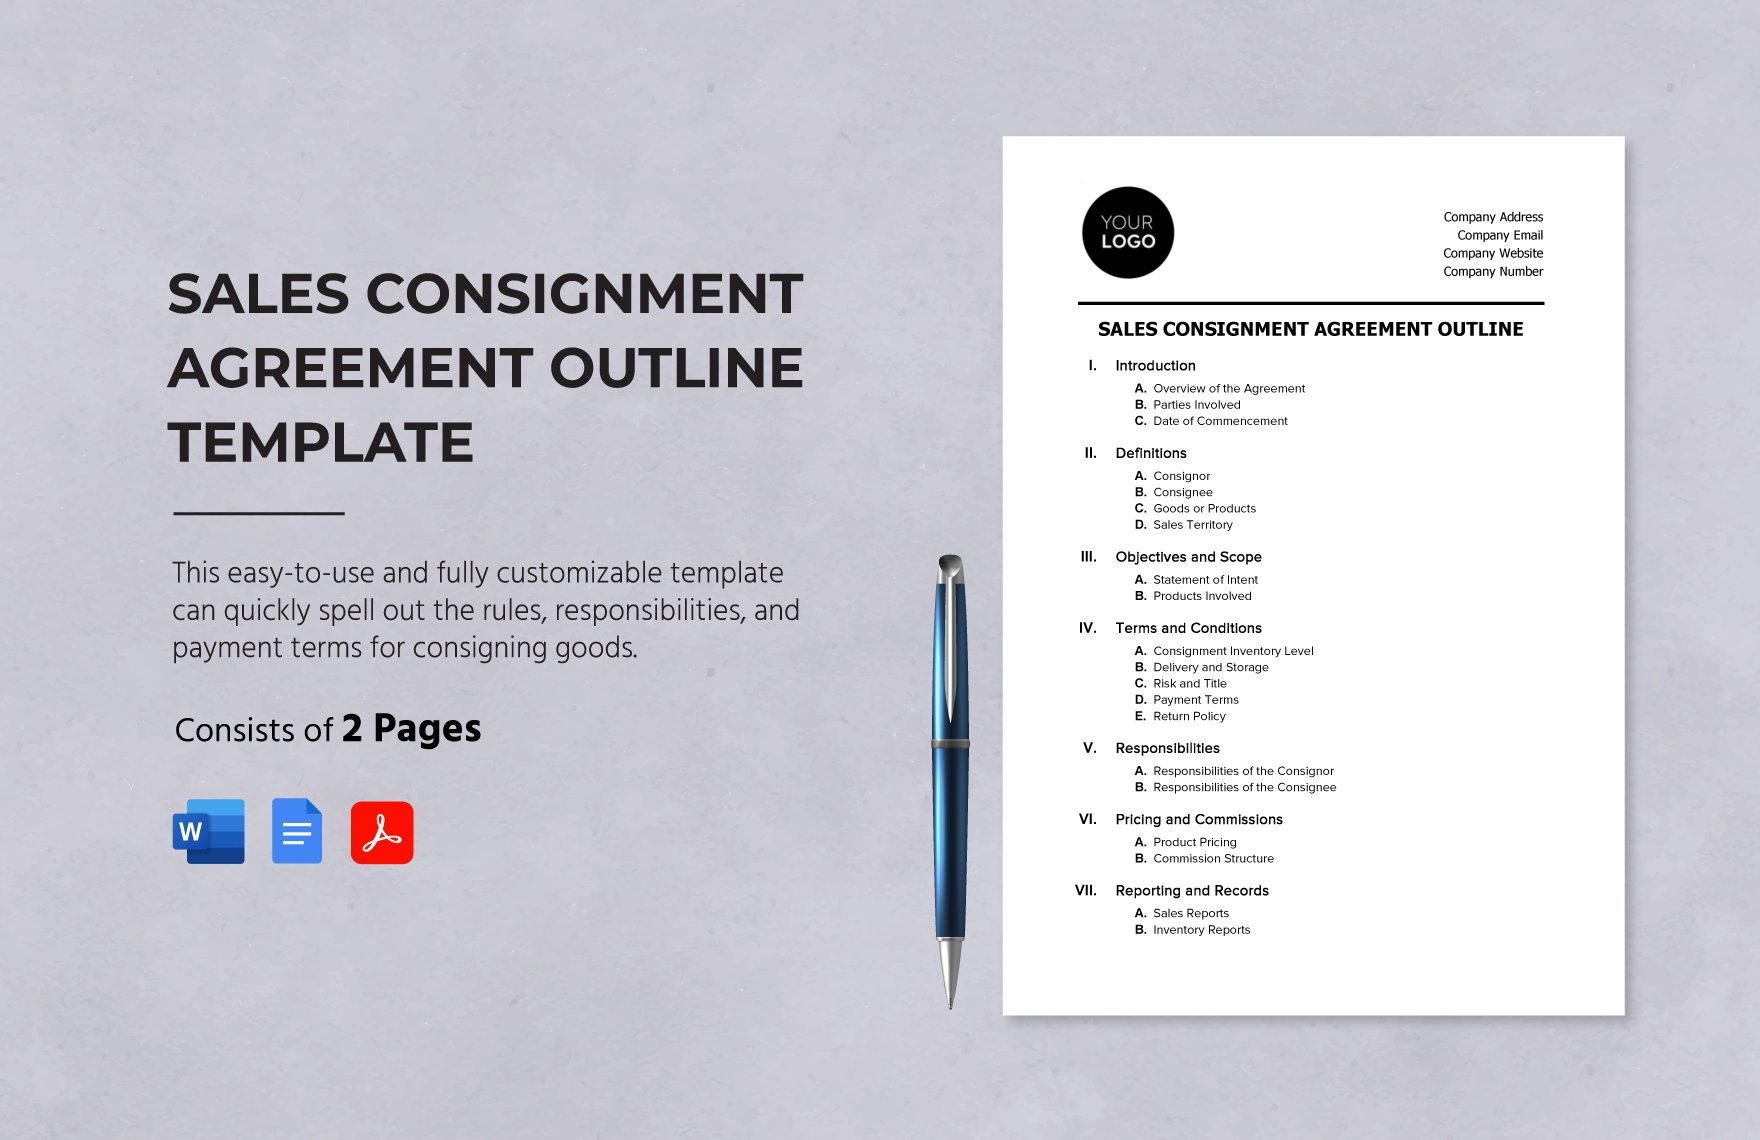 Sales Consignment Agreement Outline Template in Word, Google Docs, PDF